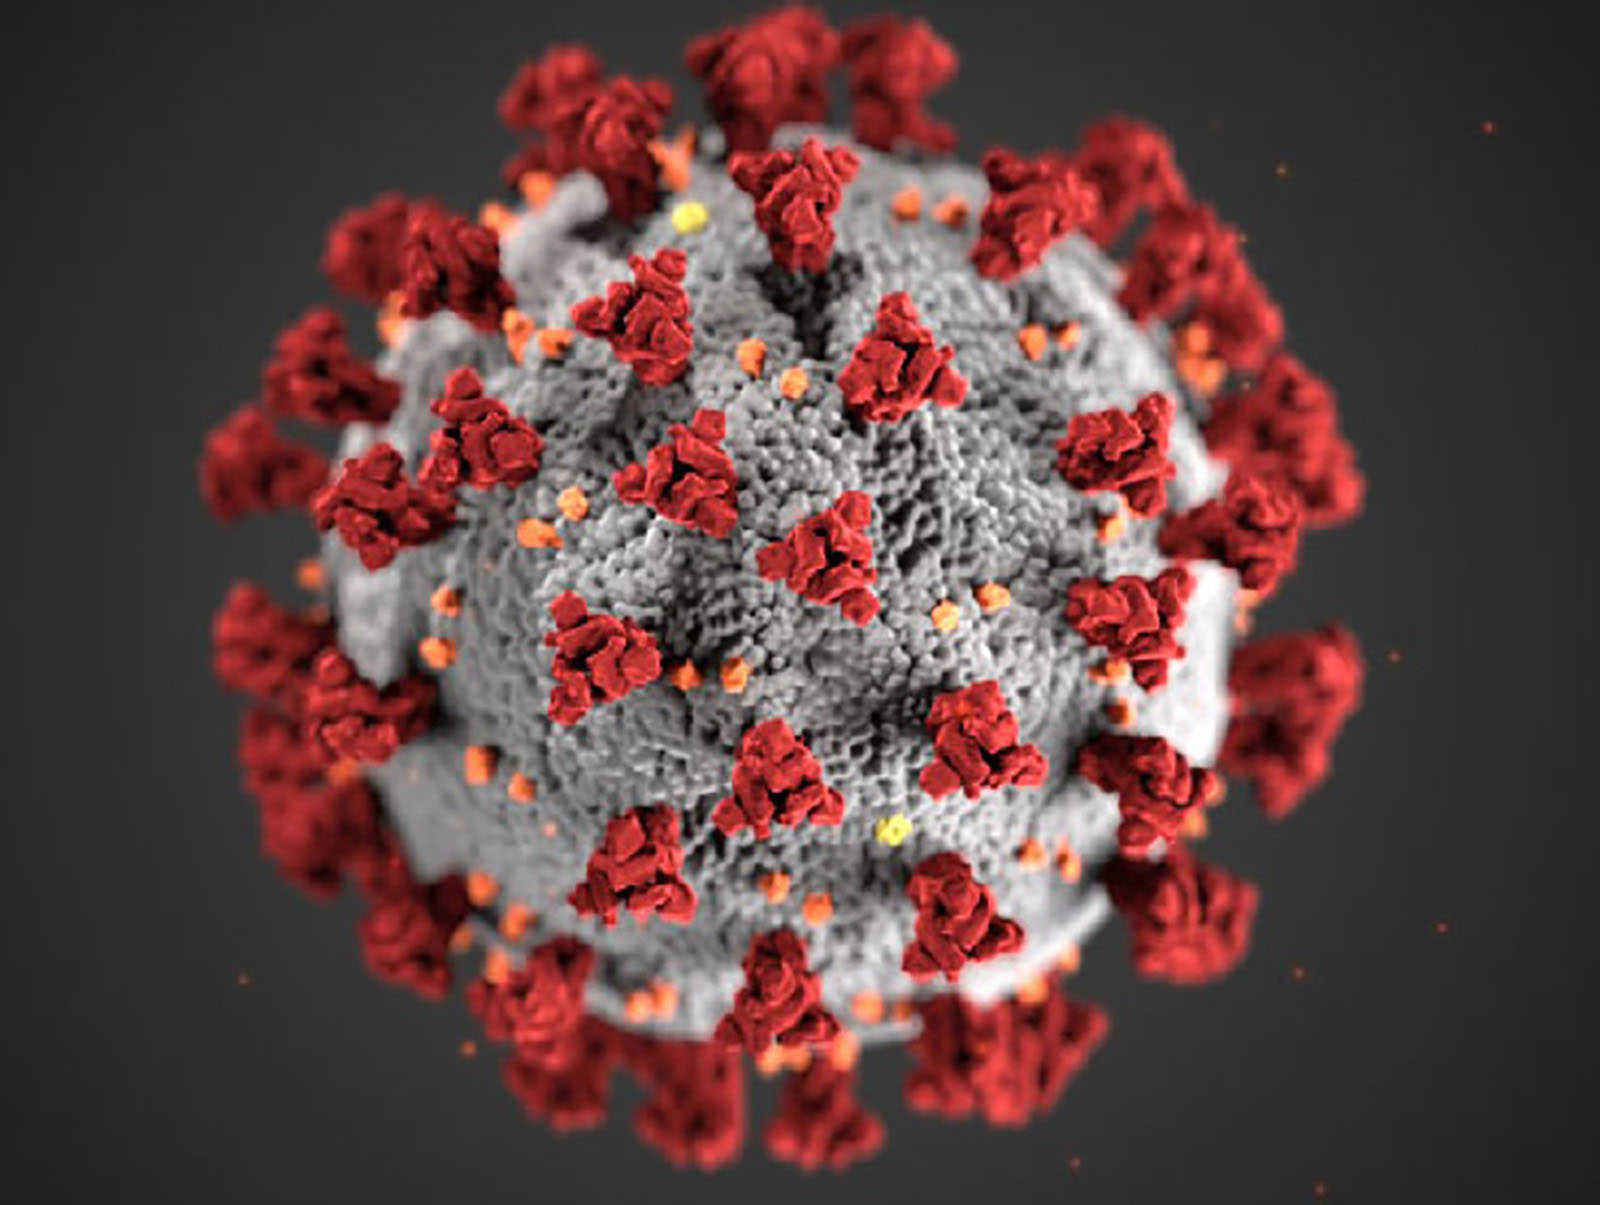 A microscopic view of the COVID-19 virus